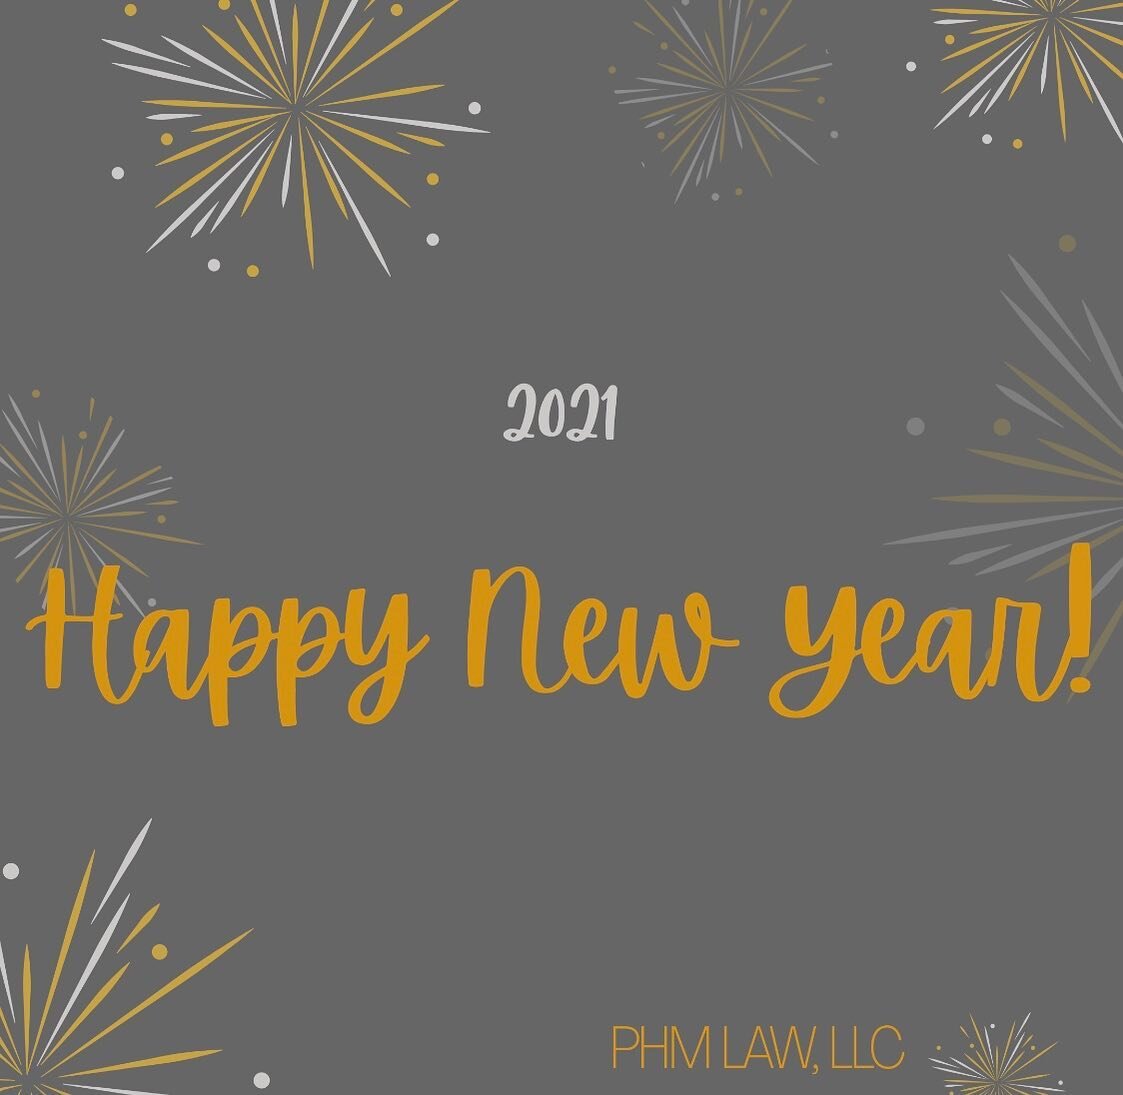 &quot;No matter how hard the past is, you can always begin again.&quot; - Jack Kornfield
____
Our office will be open until 2 on New Years Eve and will be closed on New Years Day. For emergencies, contact assistant@phmlawil.com or text 630-716-6404. 